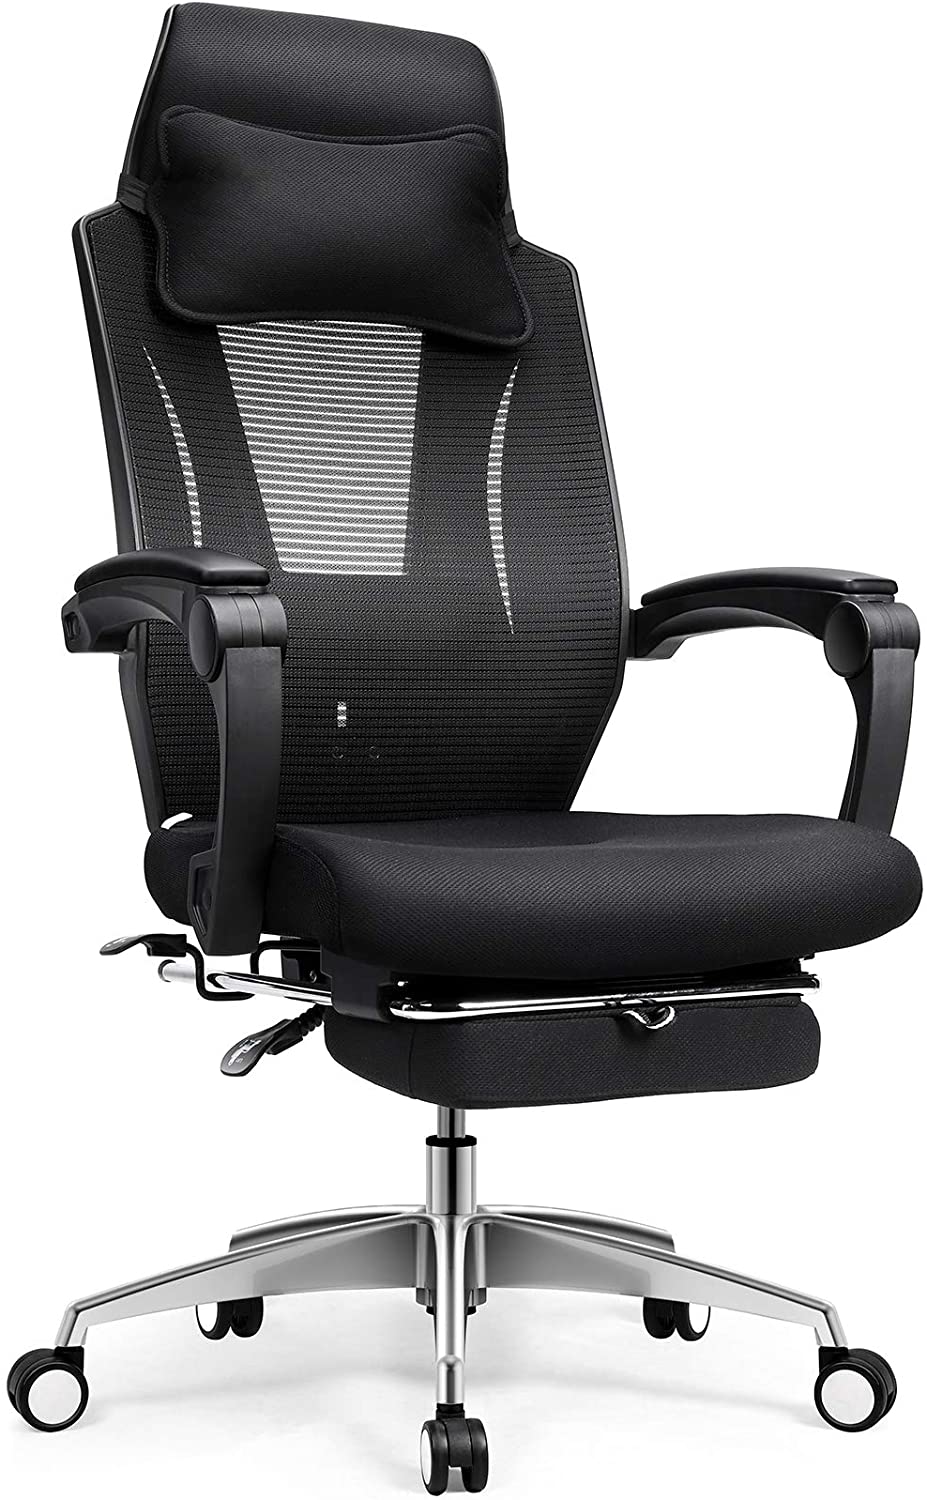 mfavour Office Chair with Footrest Ergonomic Home Office Chair